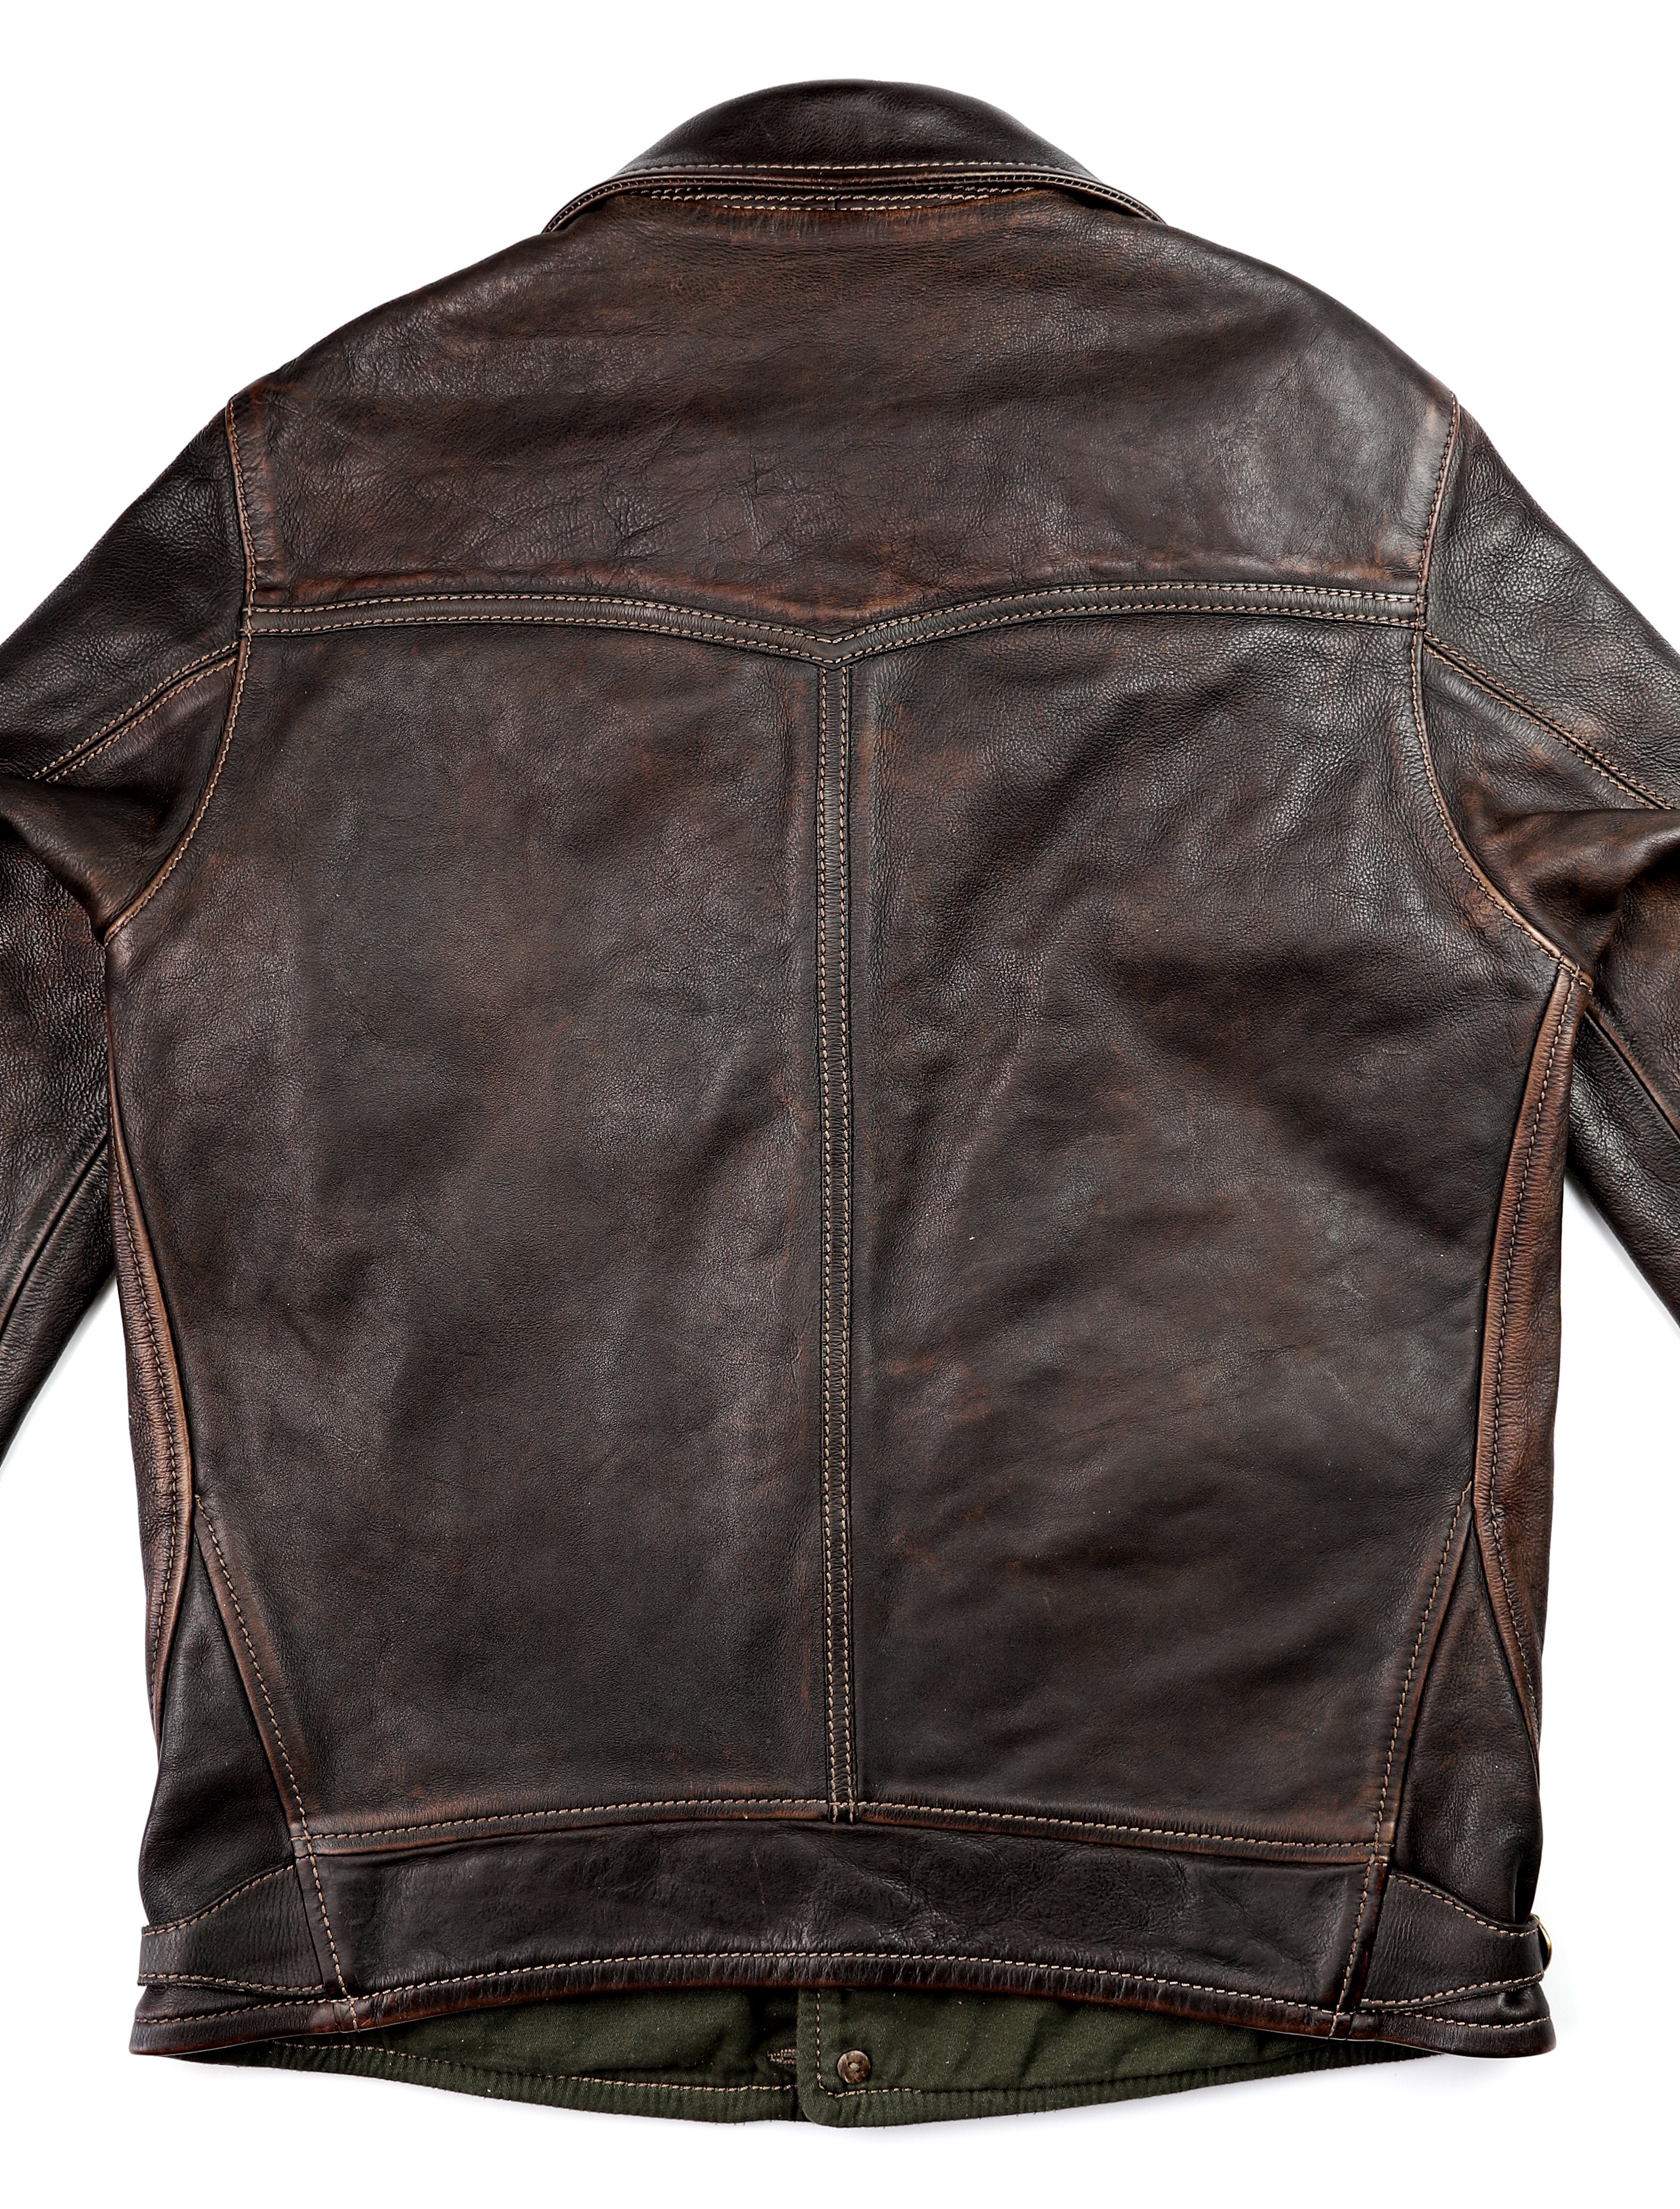 Thedi Niko Button-Up Hand-Dyed Brown Cowhide JG1 back.jpg